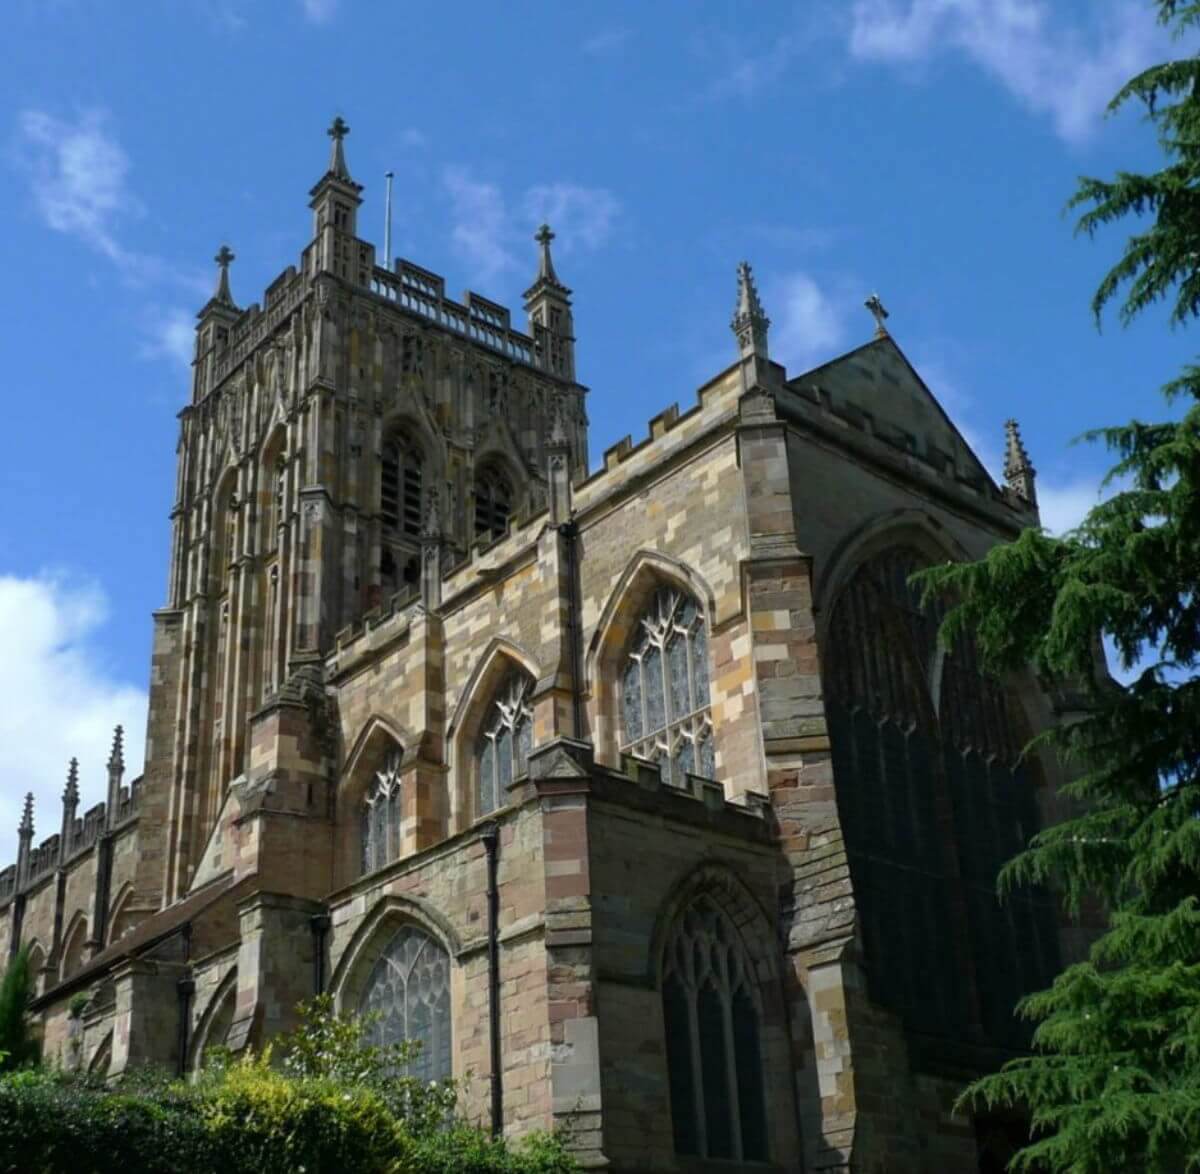 Exterior of The Great Malvern Priory